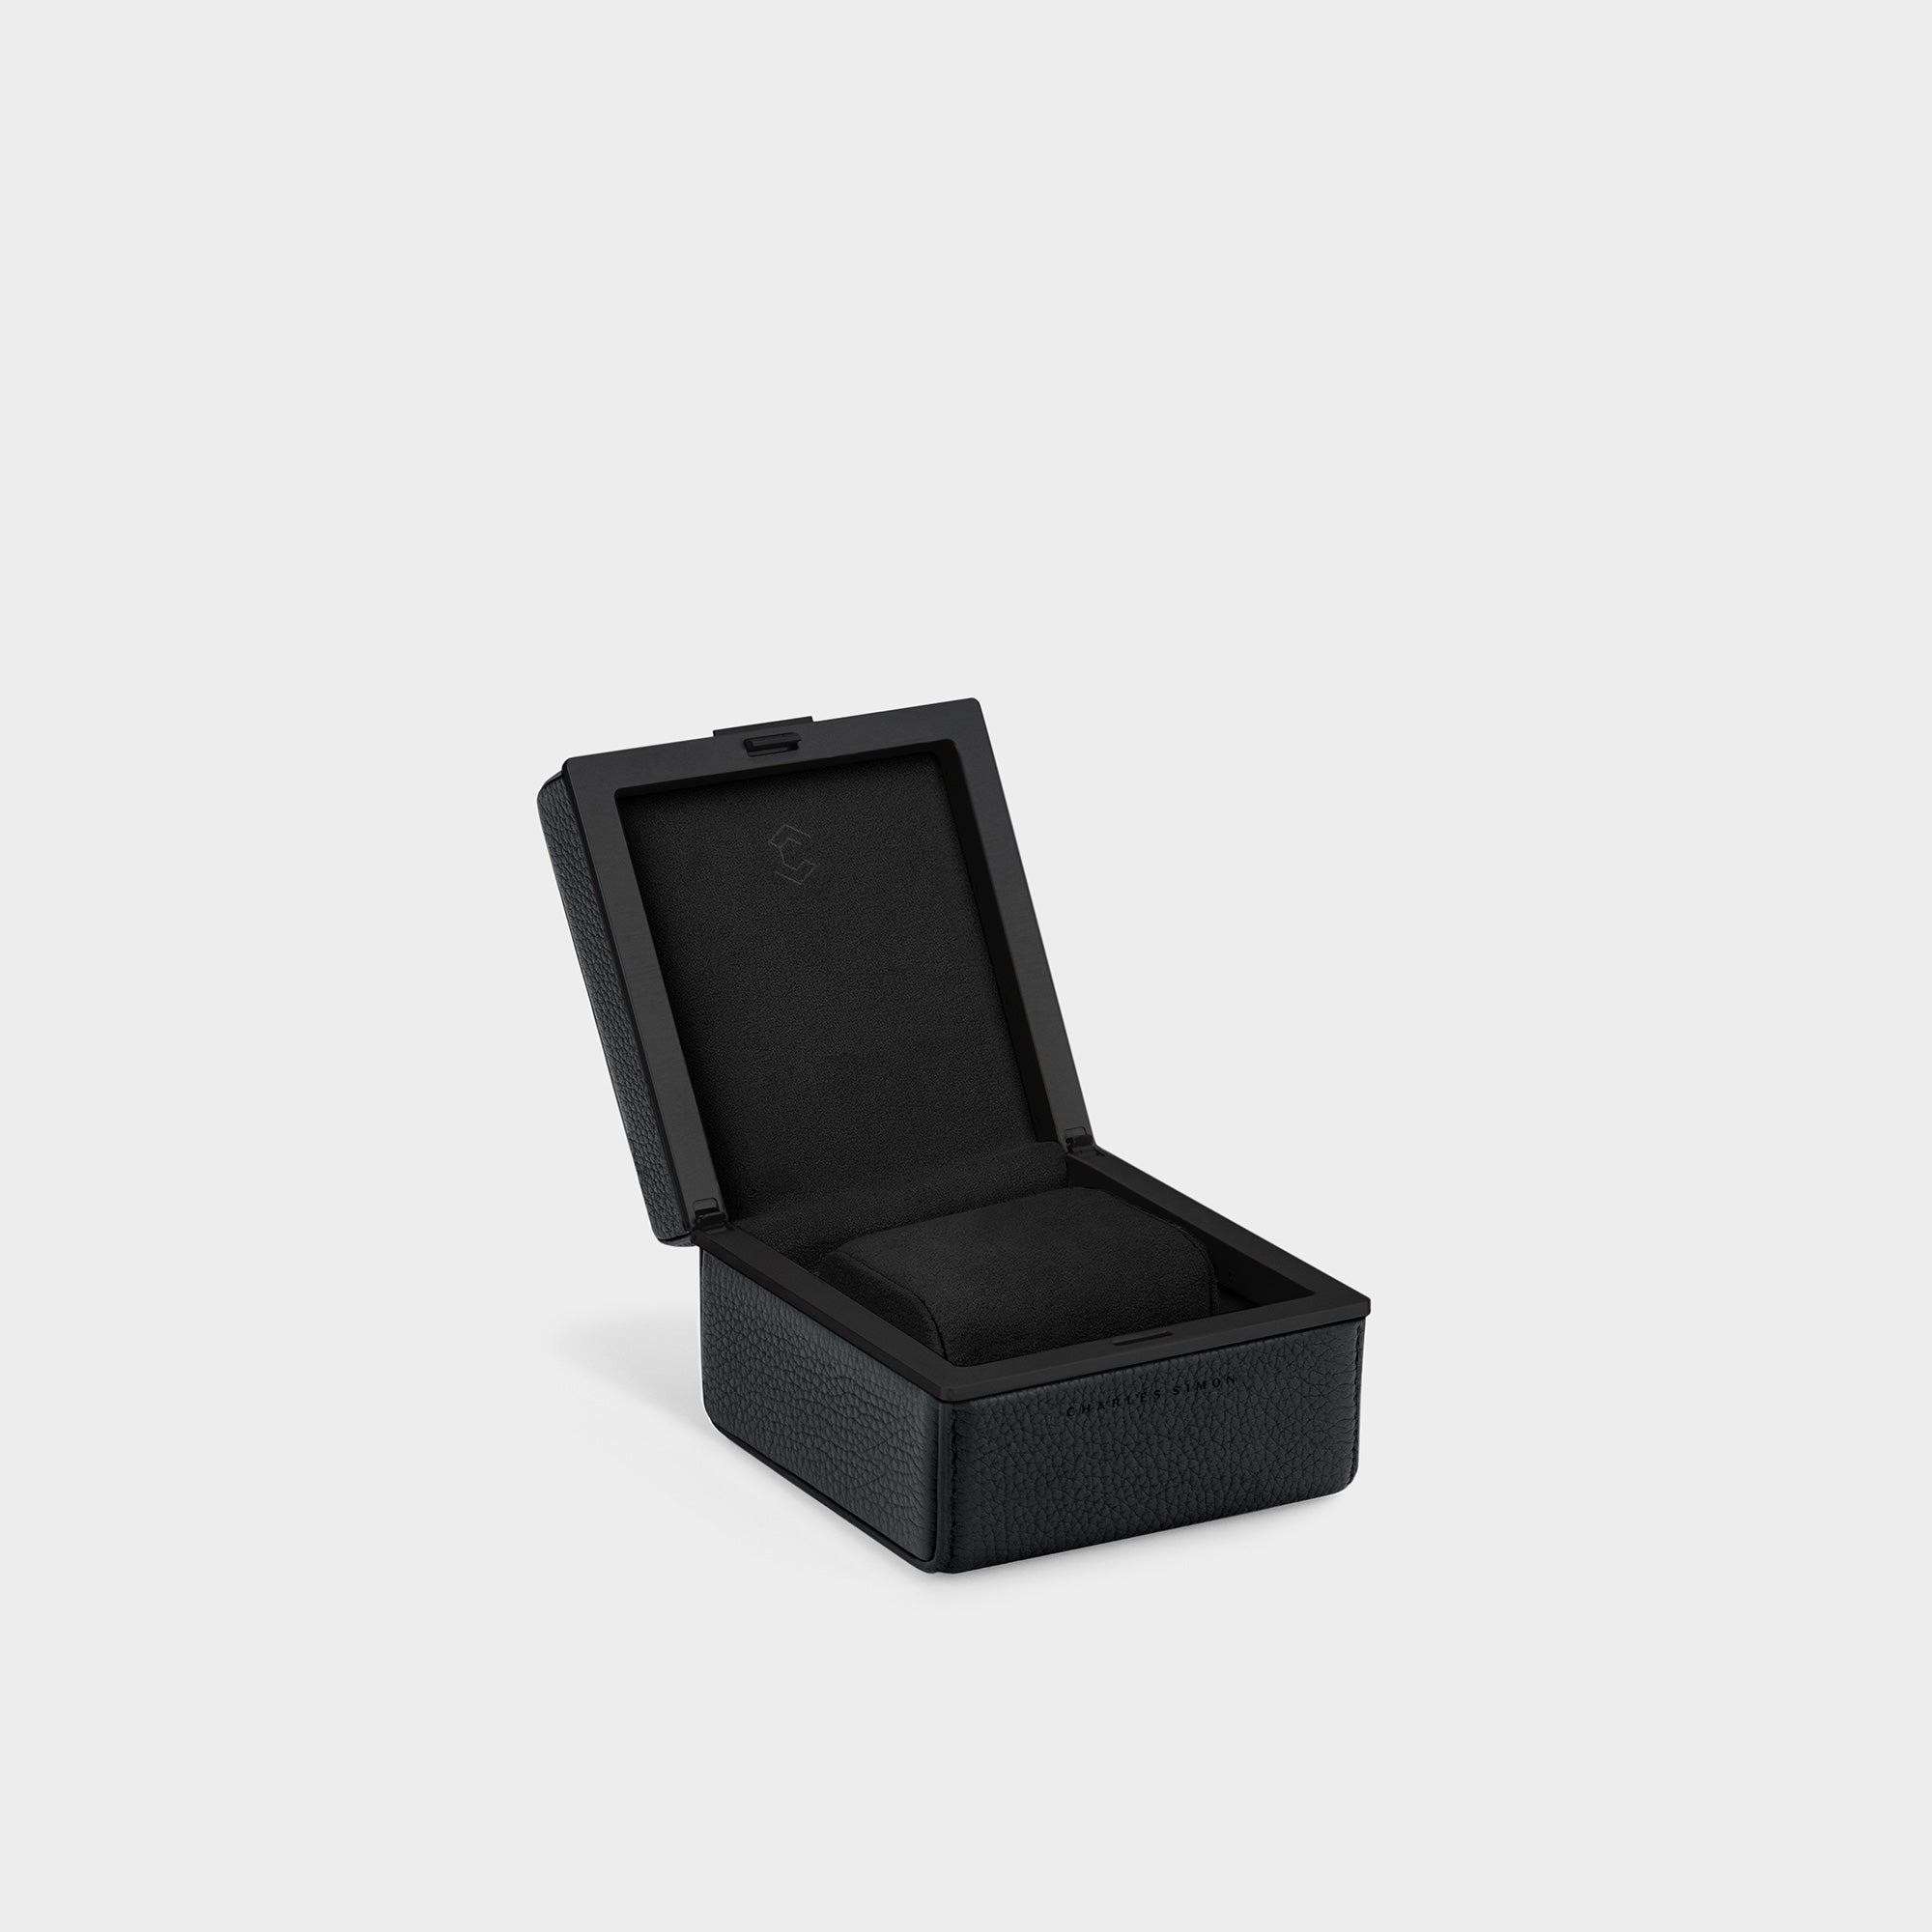 Product photo of open all black Eaton 1 luxury watch case